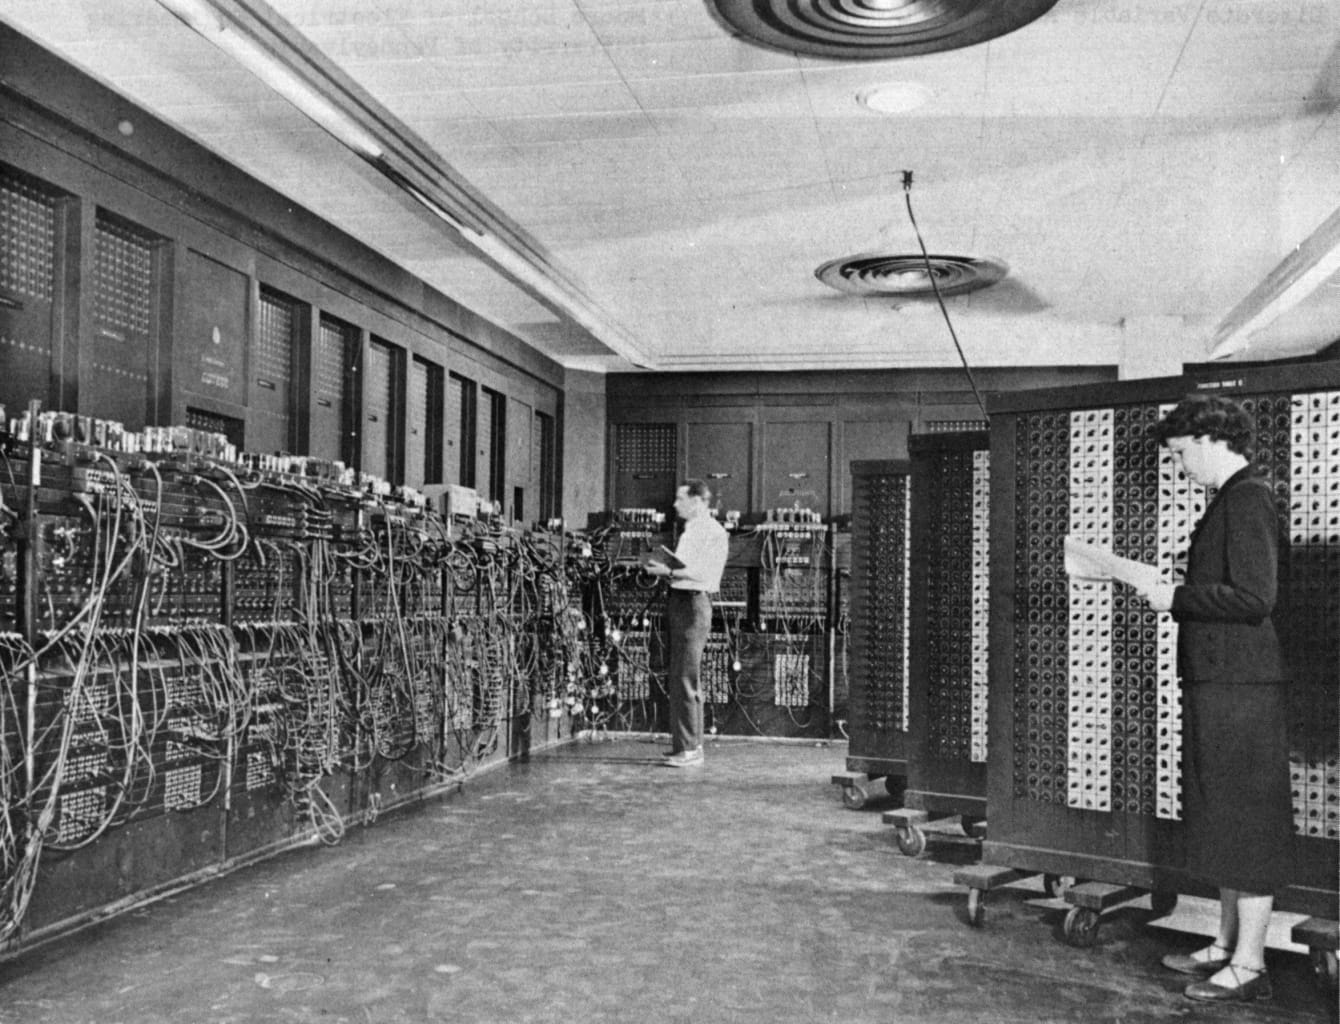 The world’s first (programmable, electronic, general purpose & digital) computer, ENIAC, or Electronic Numerical Integrator and Computer, was designed for the U.S army in UPenn in 1945. (Source: Wikipedia